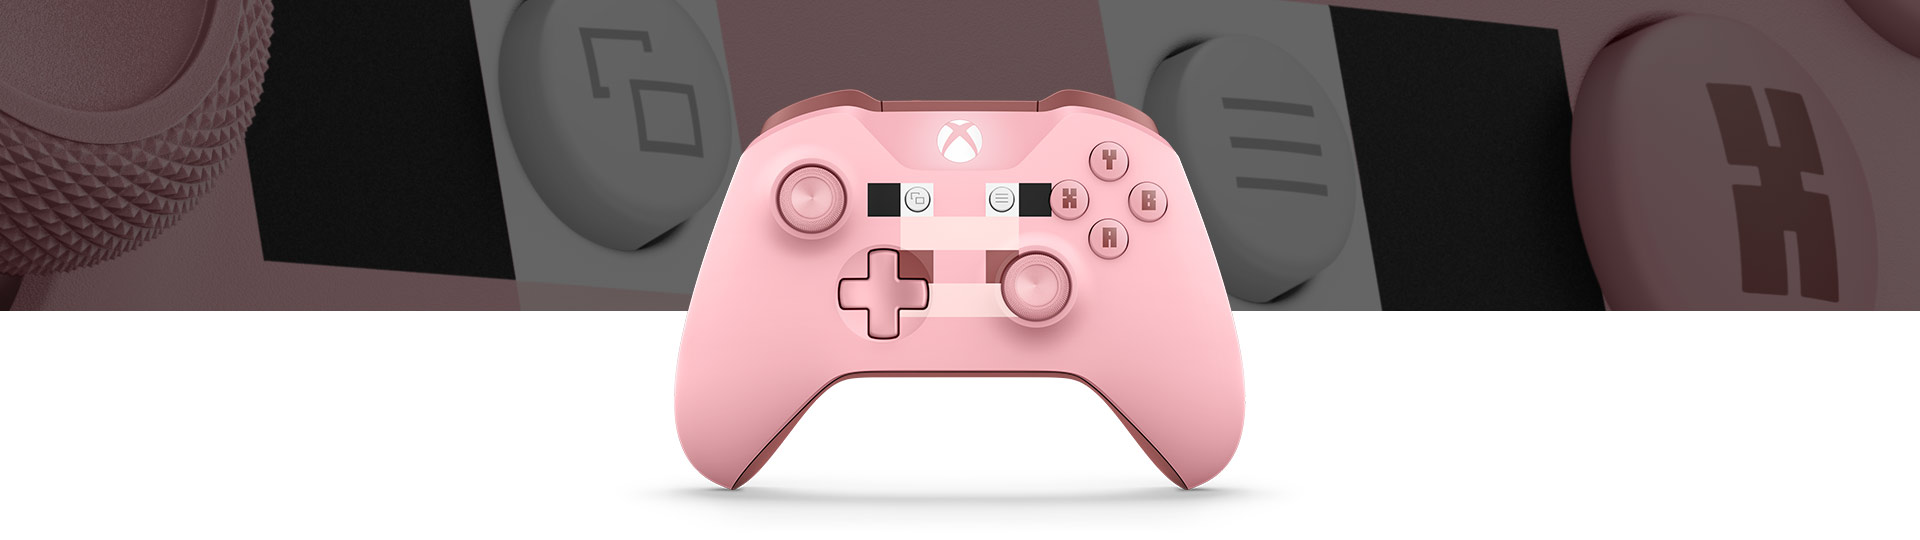 pig controller xbox one